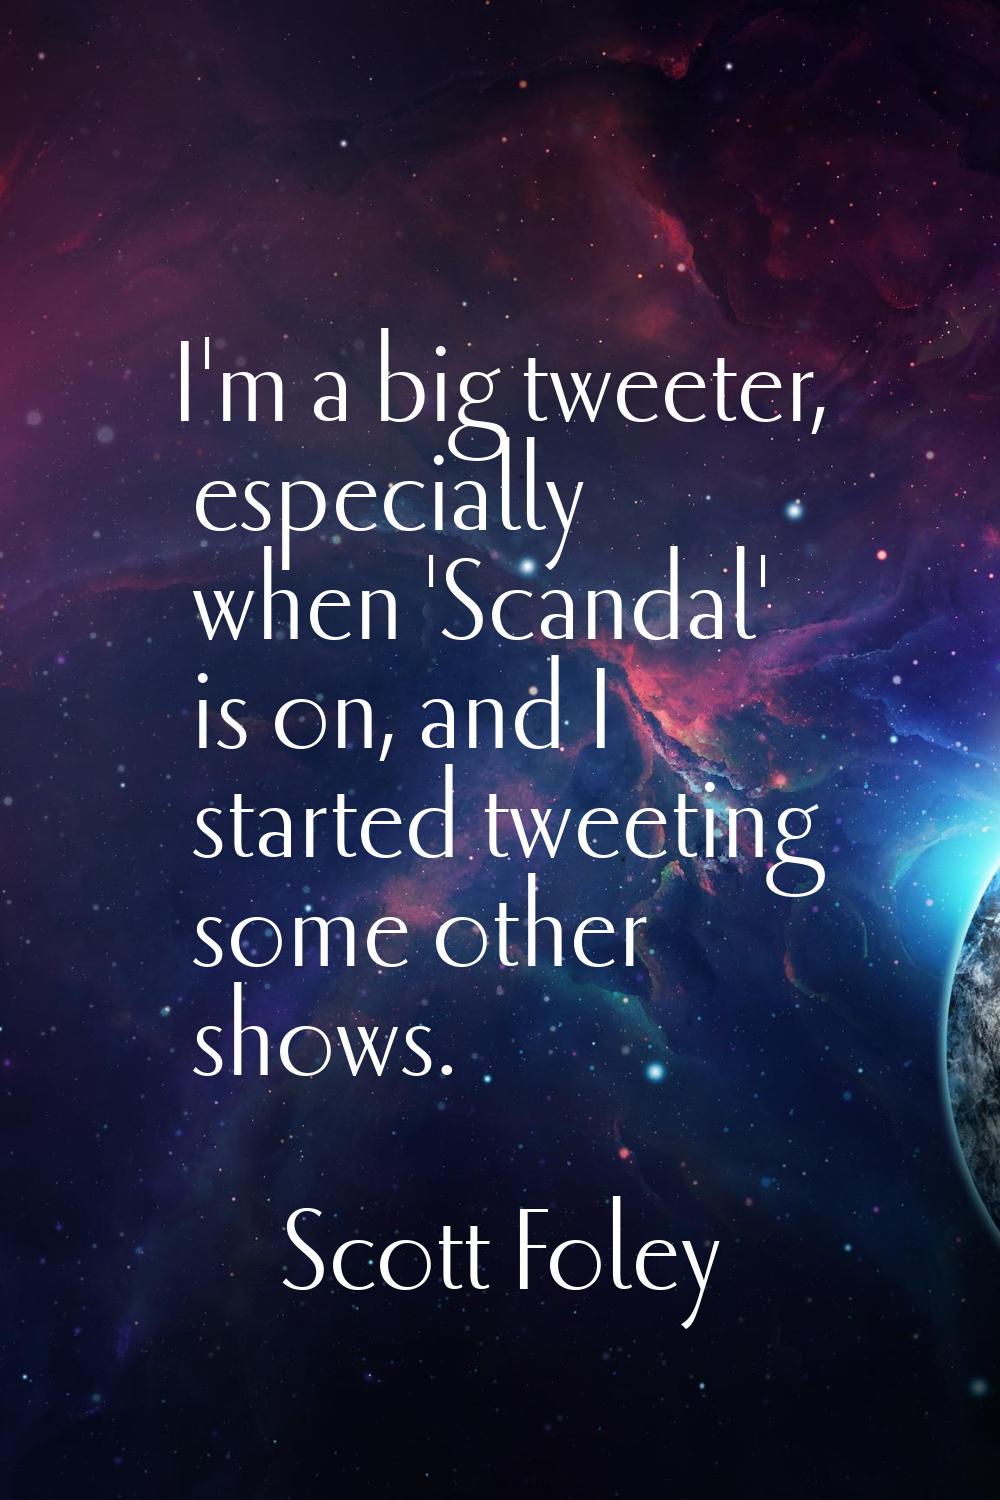 I'm a big tweeter, especially when 'Scandal' is on, and I started tweeting some other shows.